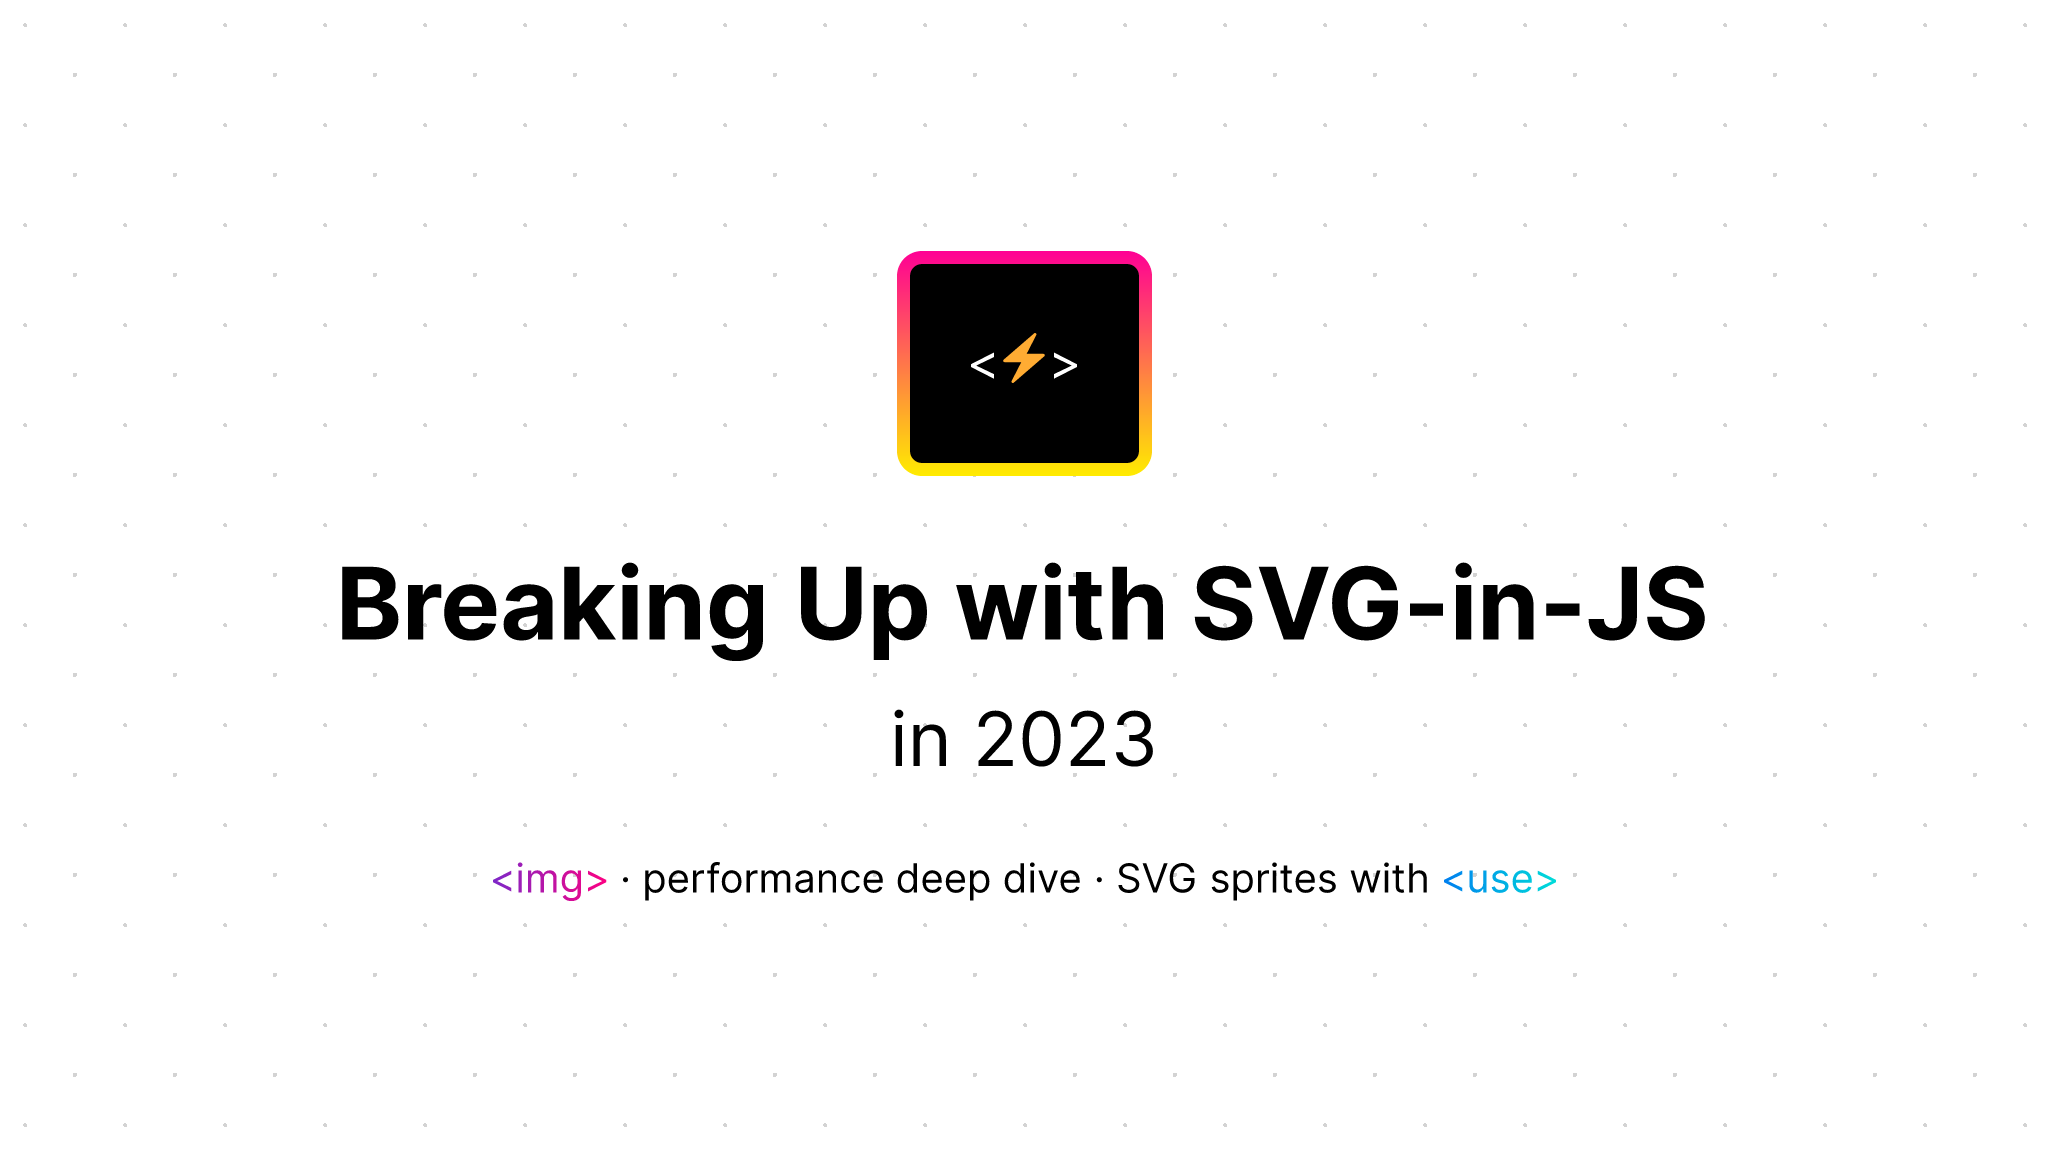 Breaking Up with SVG-in-JS in 2023